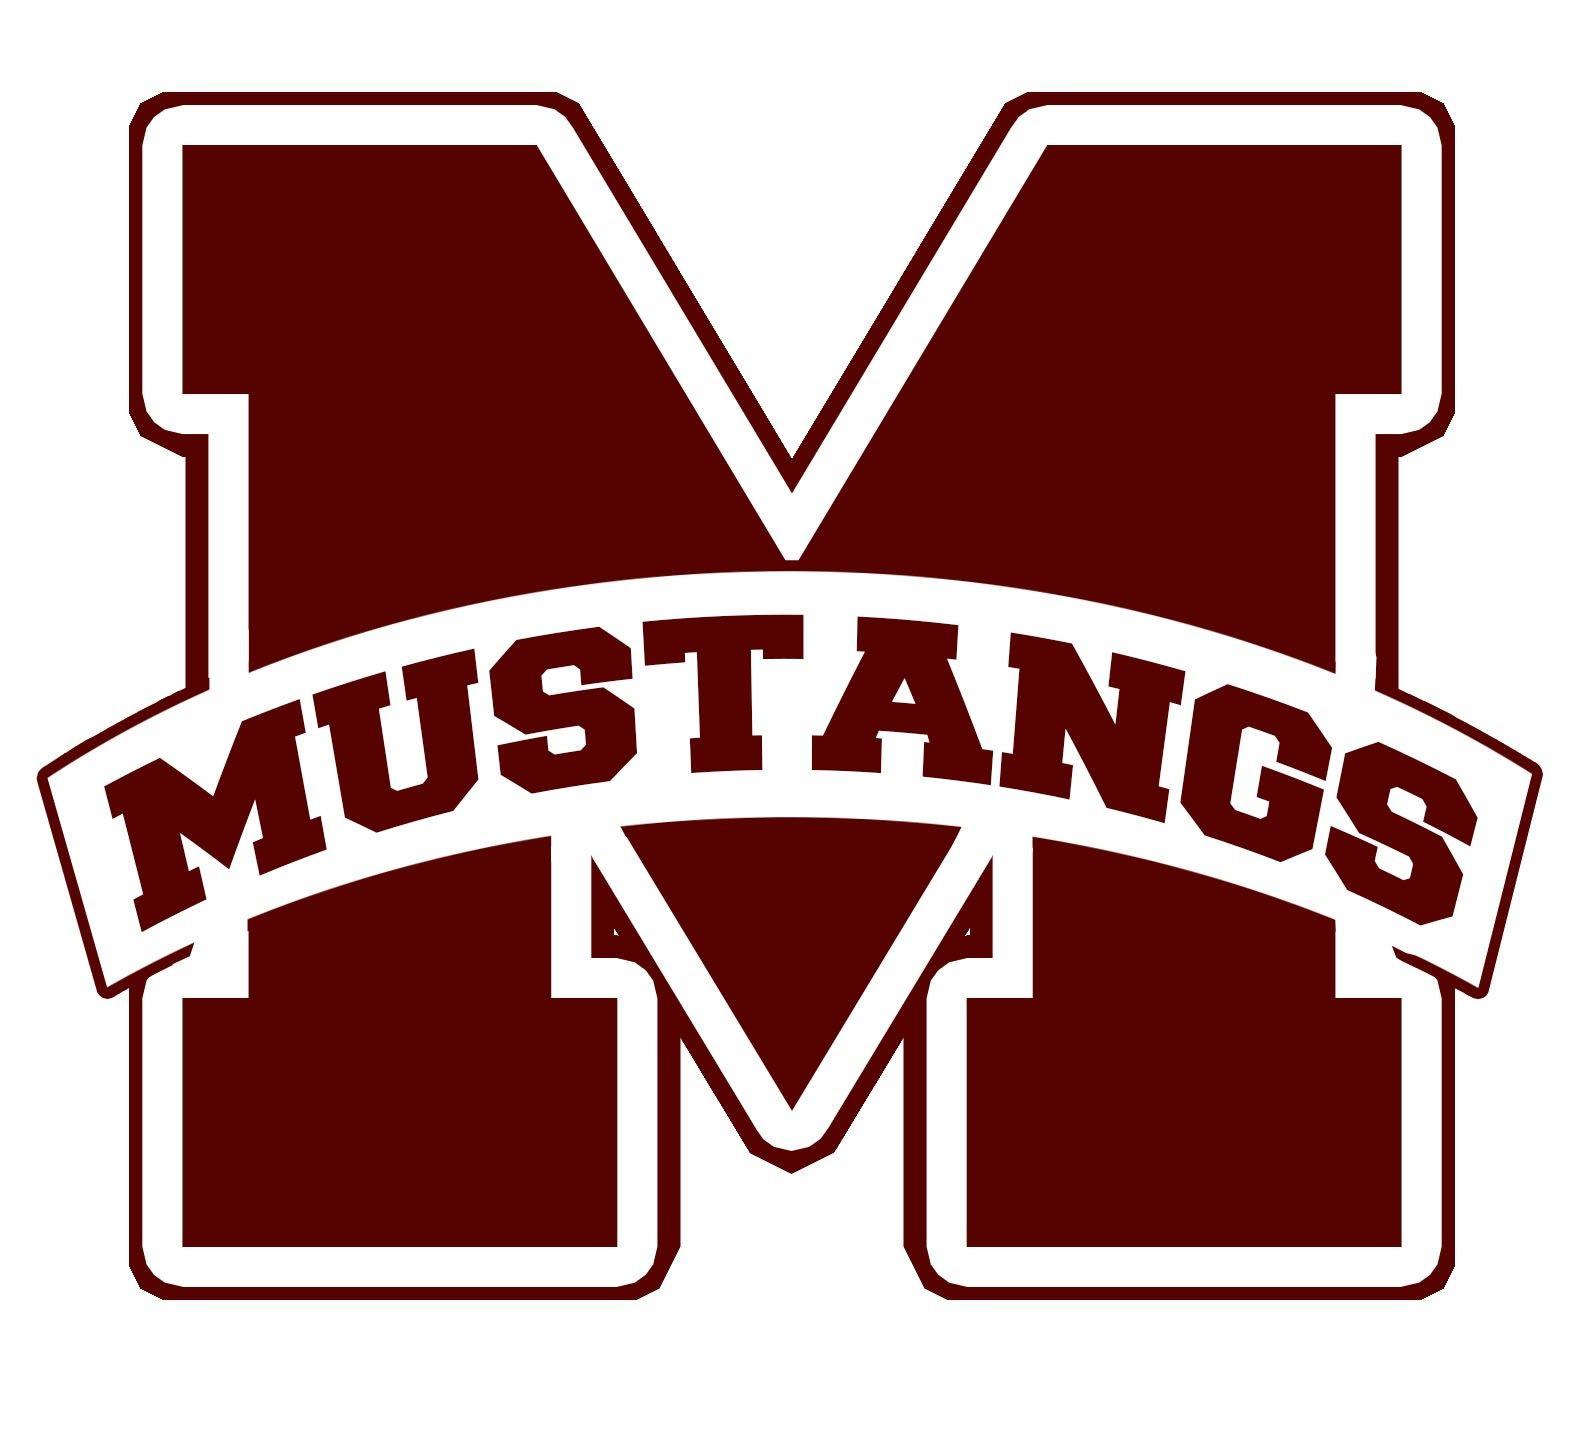 Mustang Football Logo - Image result for mustang football logo. That's A Great Idea. Love